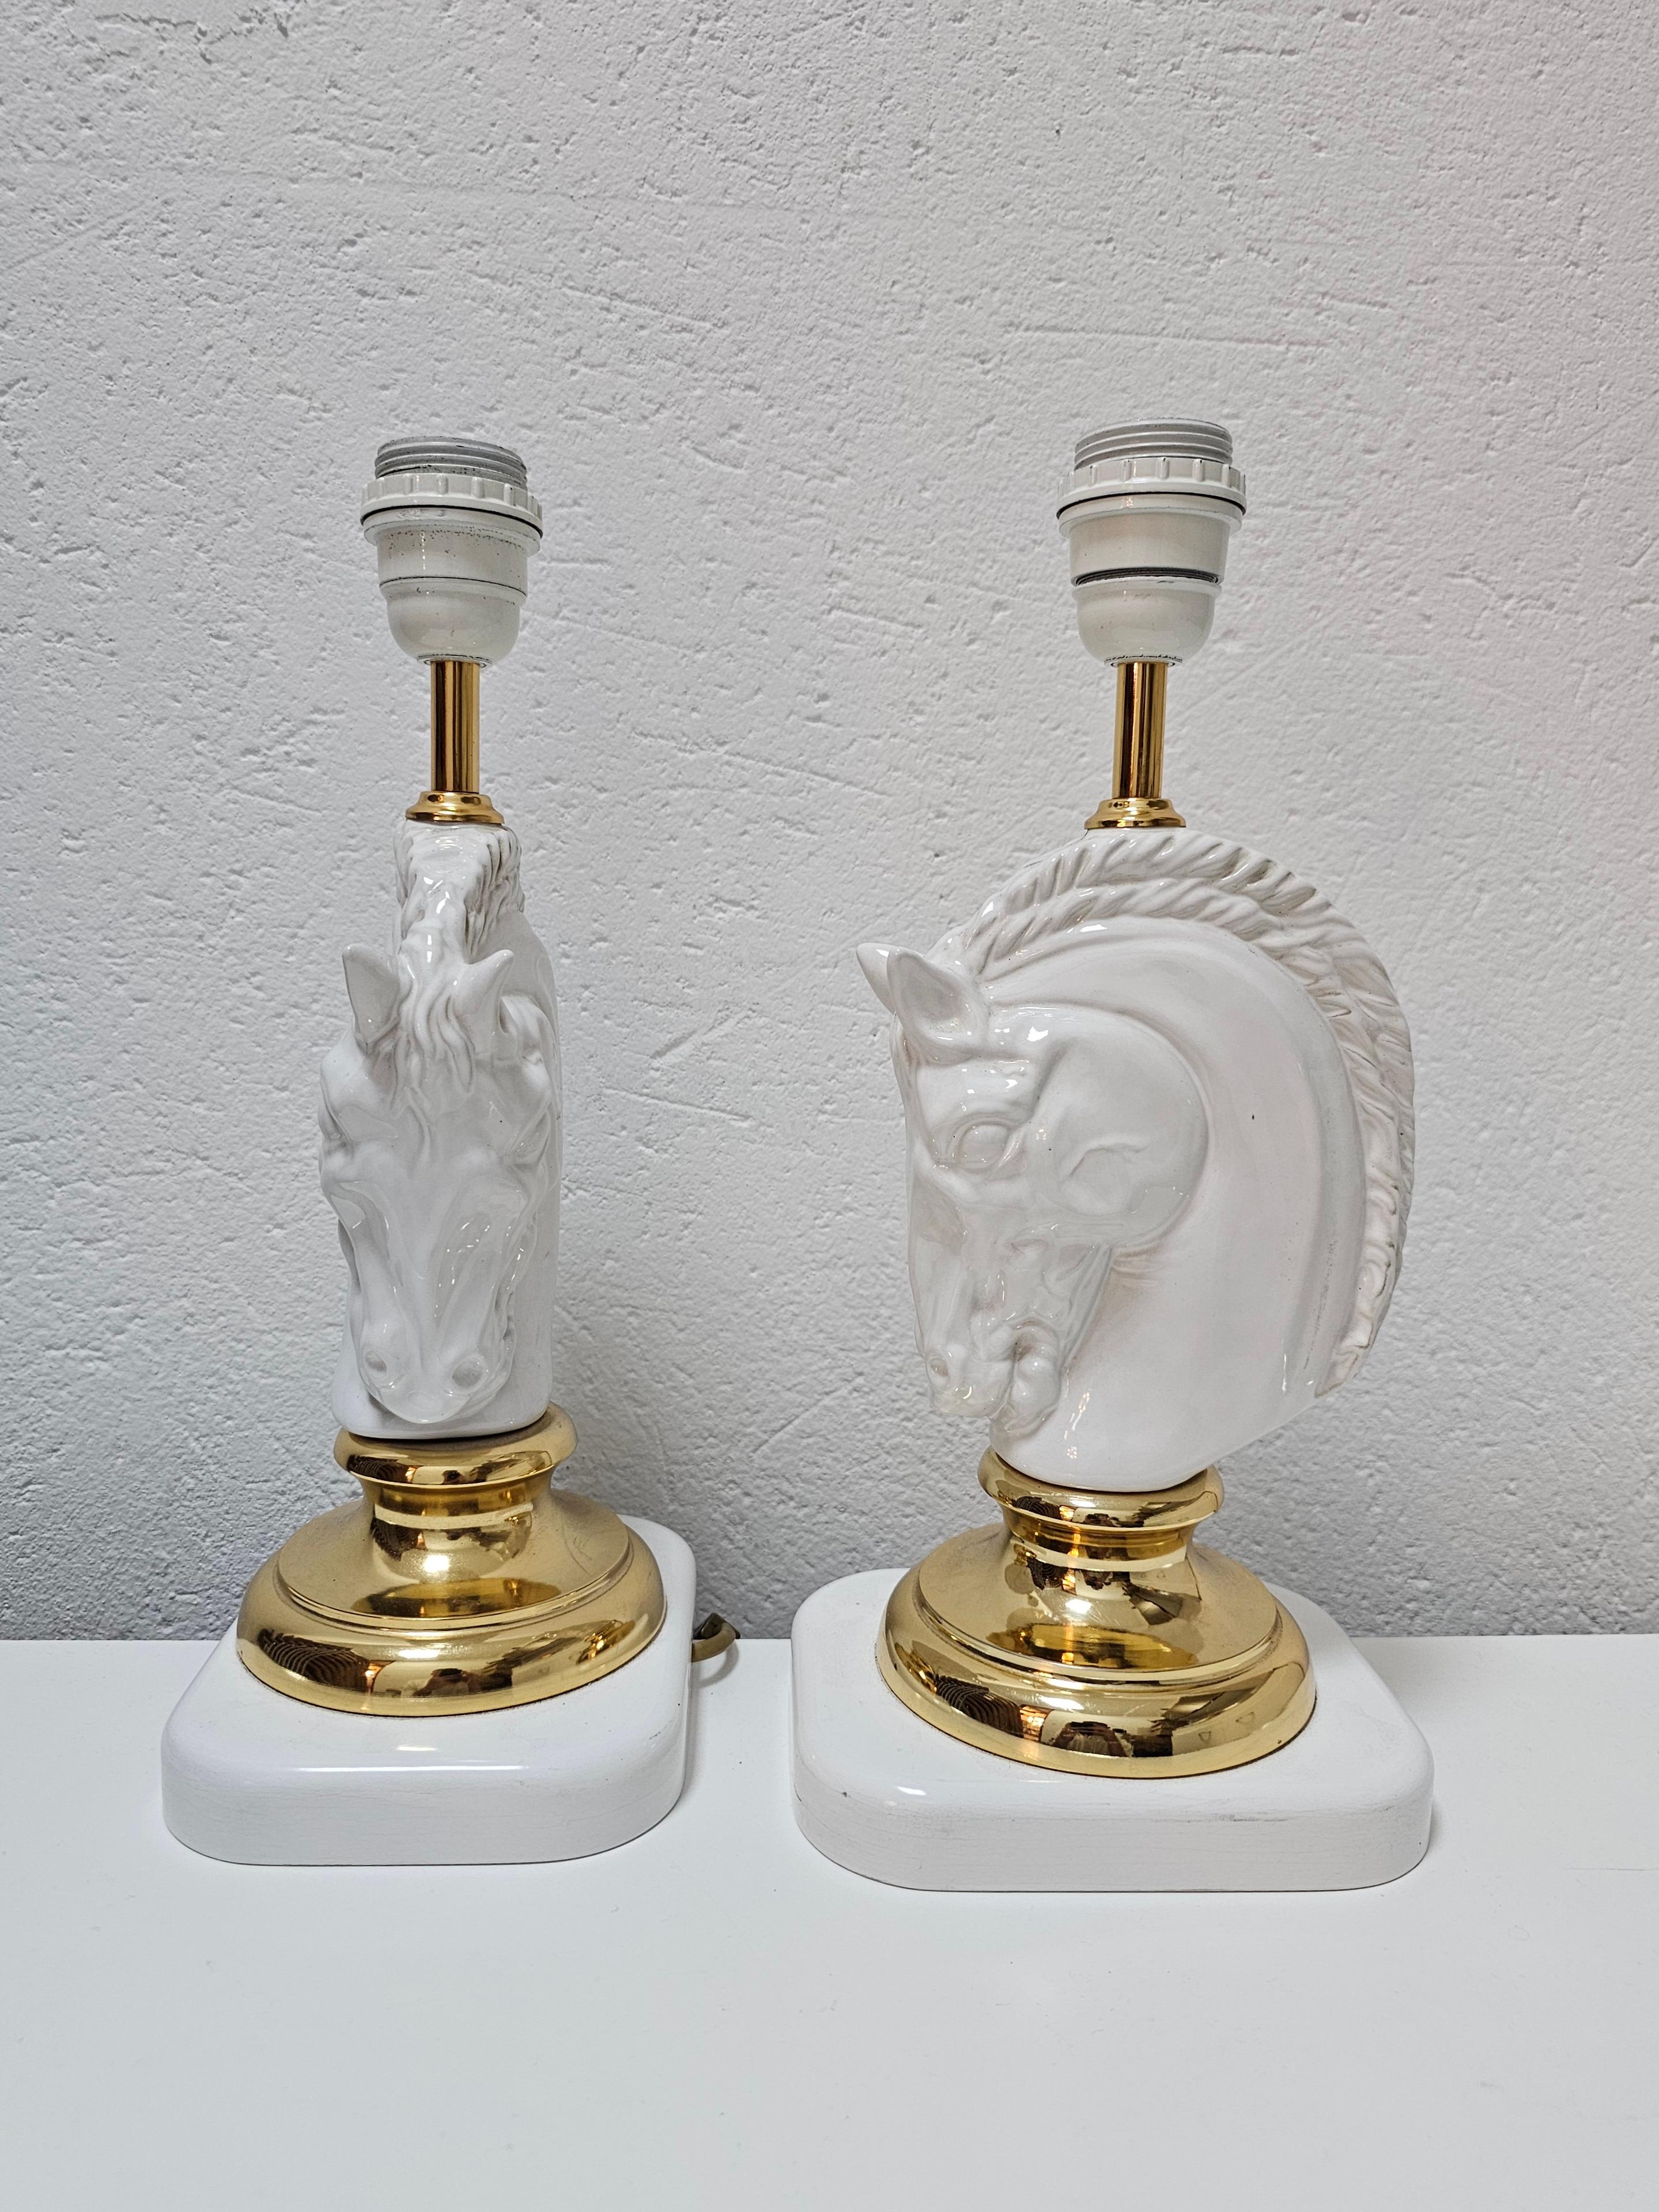 In this listing you will find a pair of very attractive Hollywood Regency Table Lamps done in white ceramics and brass. The lamps are shaped as horse heads, with strong and expressive features and strong musculature. Made in Austria in 1970s.

Lamps